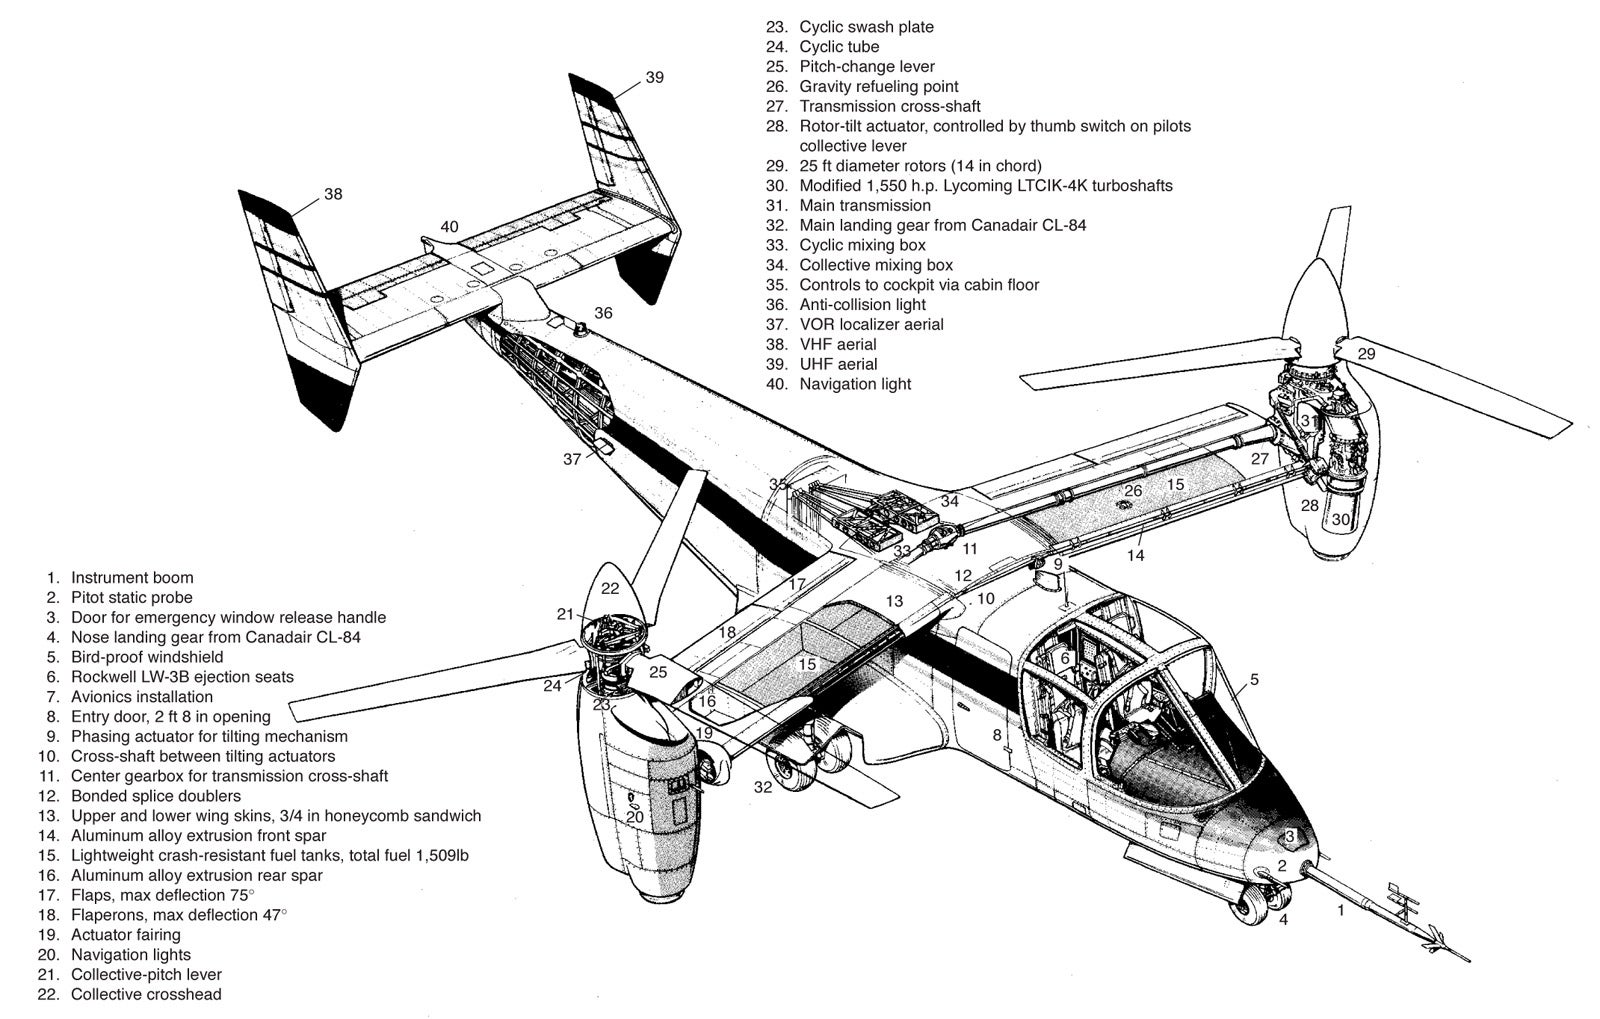 Feast Your Eyes On These Rare Aircraft Cutaway Drawings ...